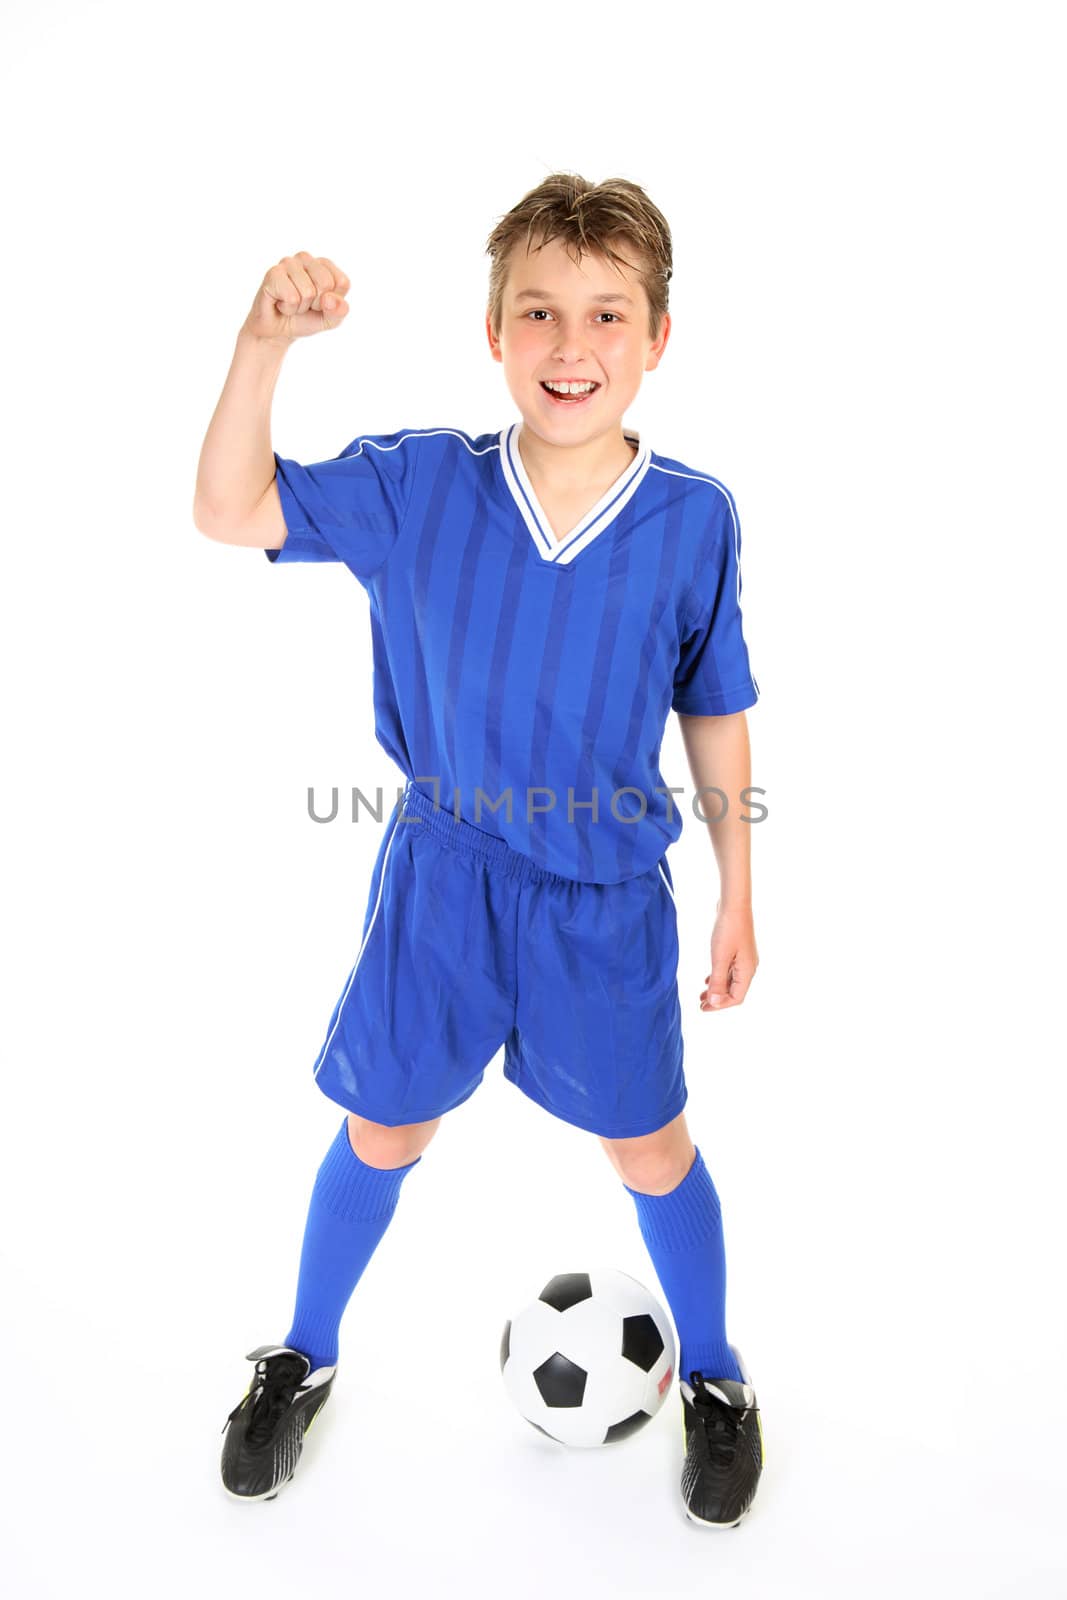 A boy in soccer jersey and shorts with fists in victory